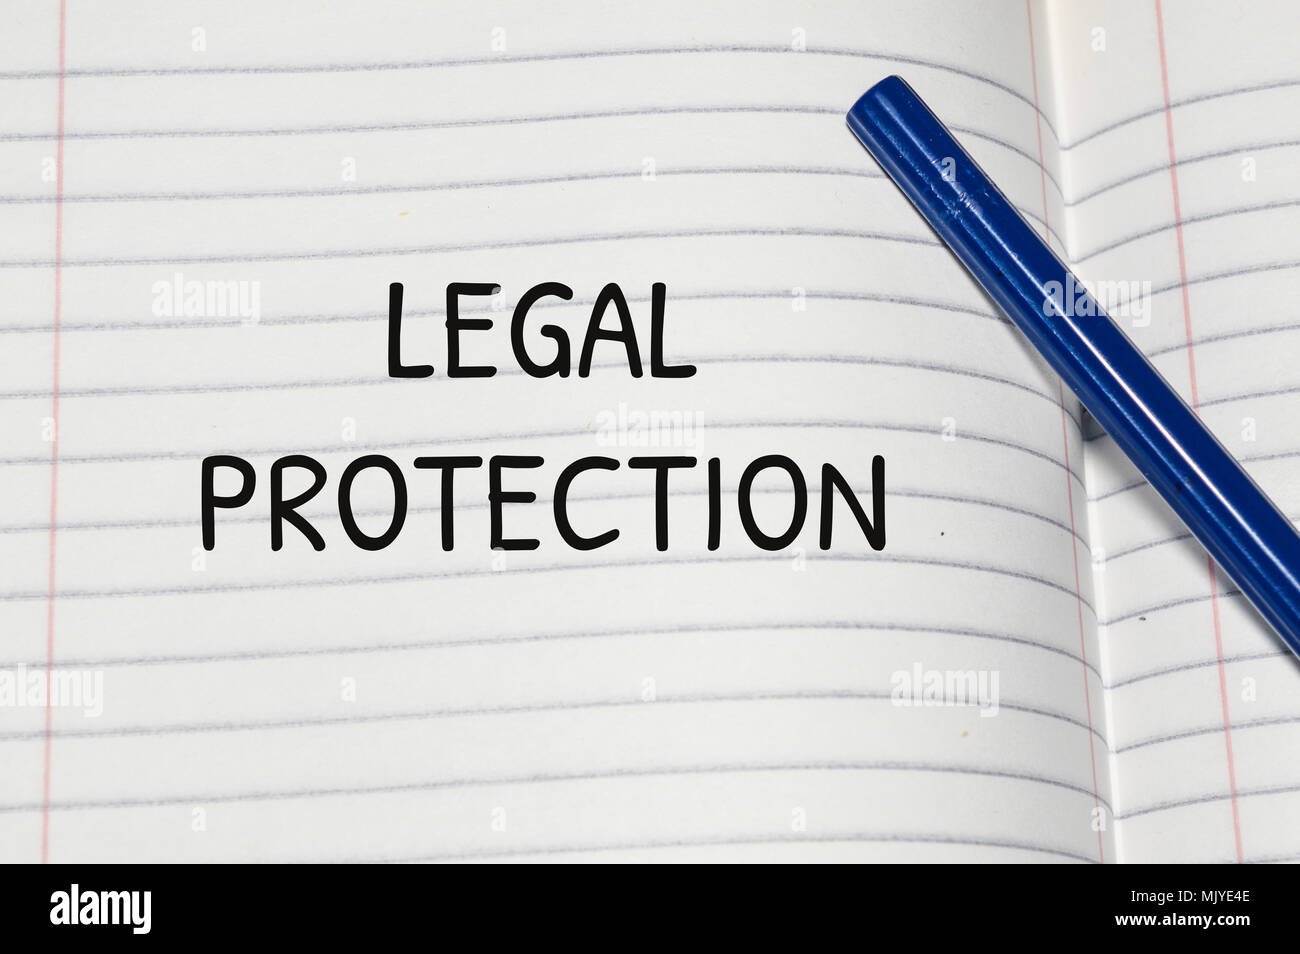 Legal protection word written on white paper Stock Photo